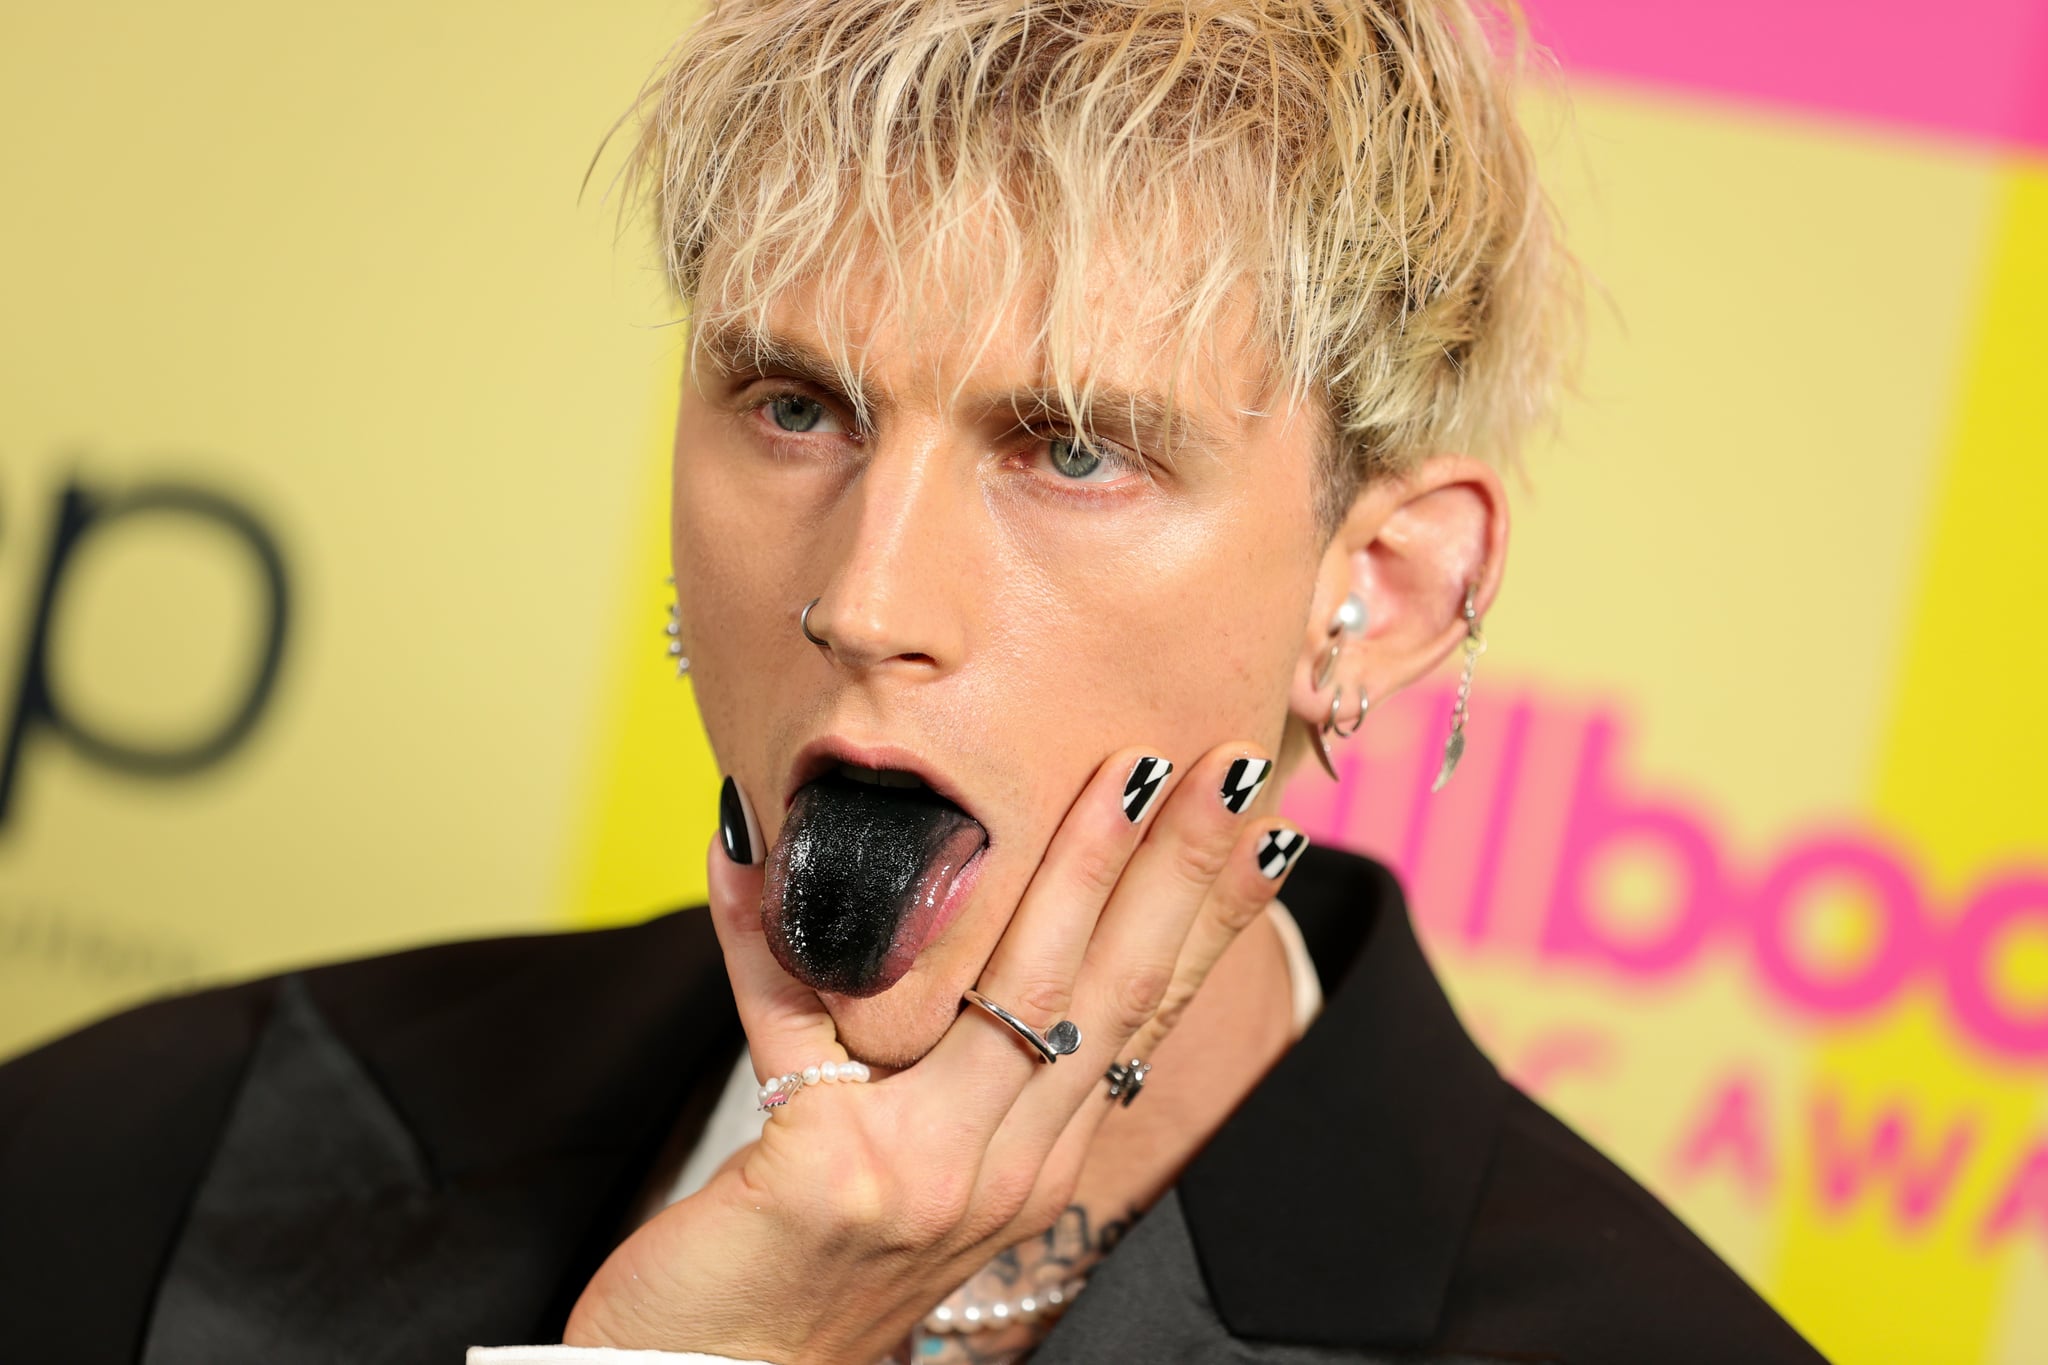 LOS ANGELES, CALIFORNIA - MAY 23: Machine Gun Kelly poses backstage for the 2021 Billboard Music Awards, broadcast on May 23, 2021 at Microsoft Theatre in Los Angeles, California. (Photo by Rich Fury/Getty Images for dcp)